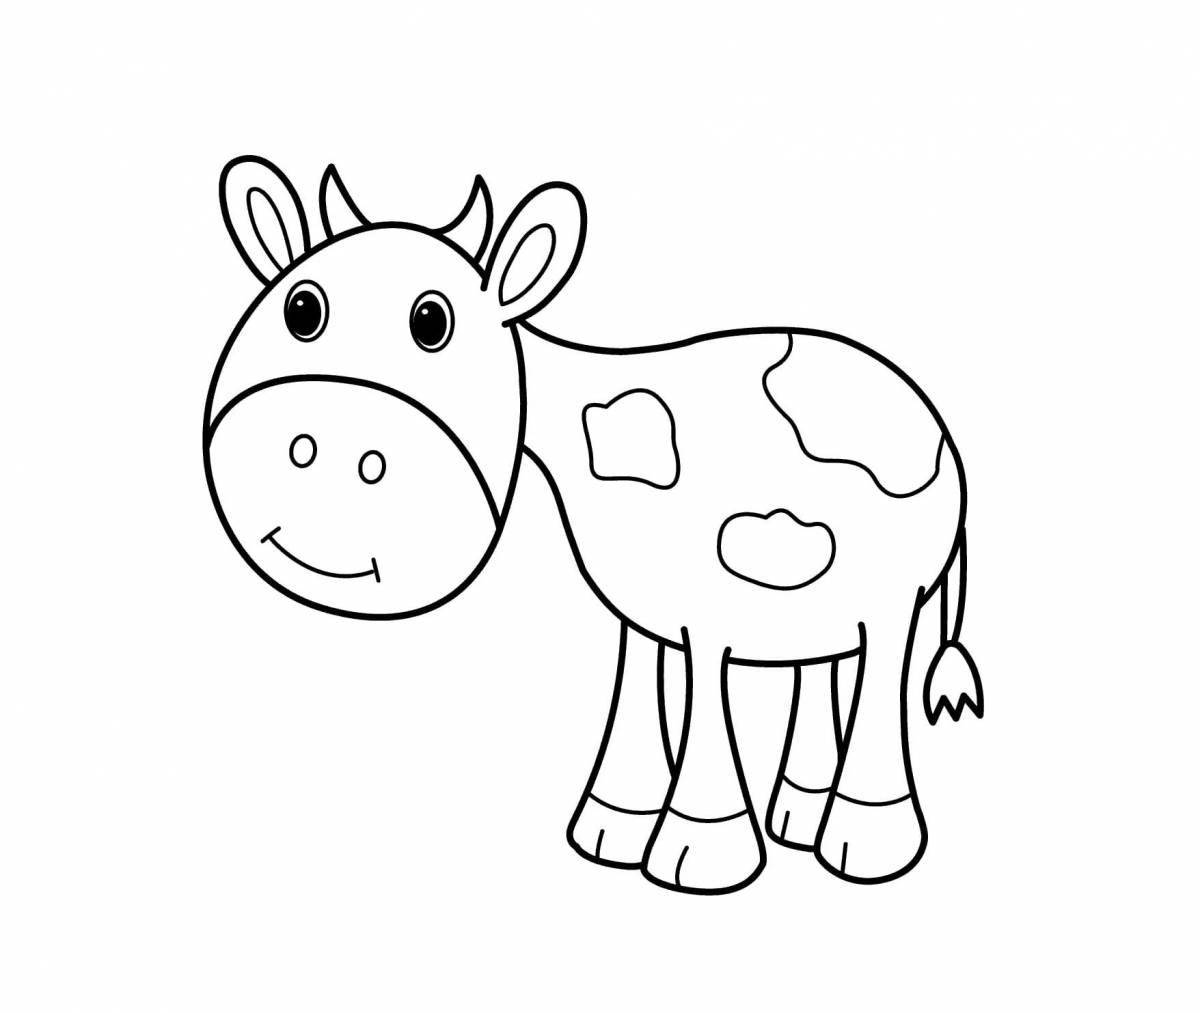 Coloring page nice cow for kids